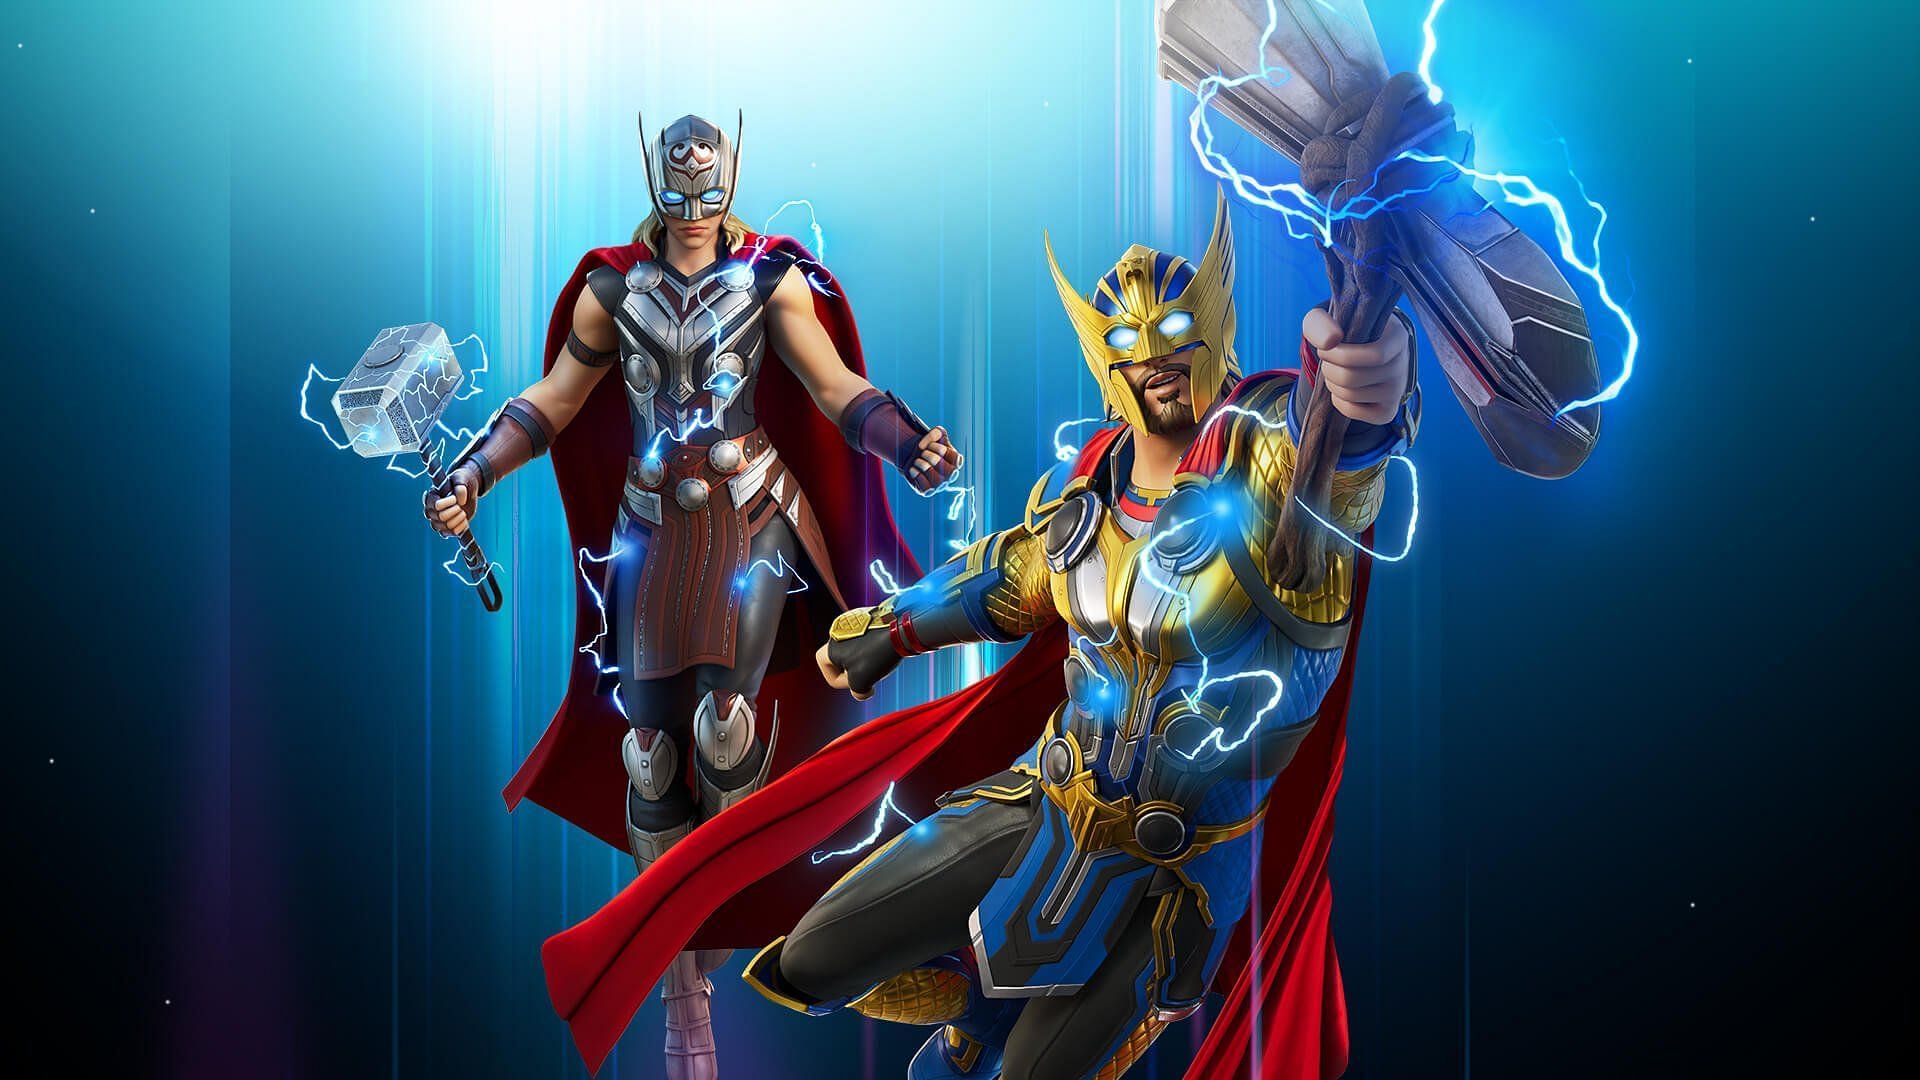 The Gods Of Thunder pack is available for purchase in the Item Shop (Image via Epic Games/Fortnite)